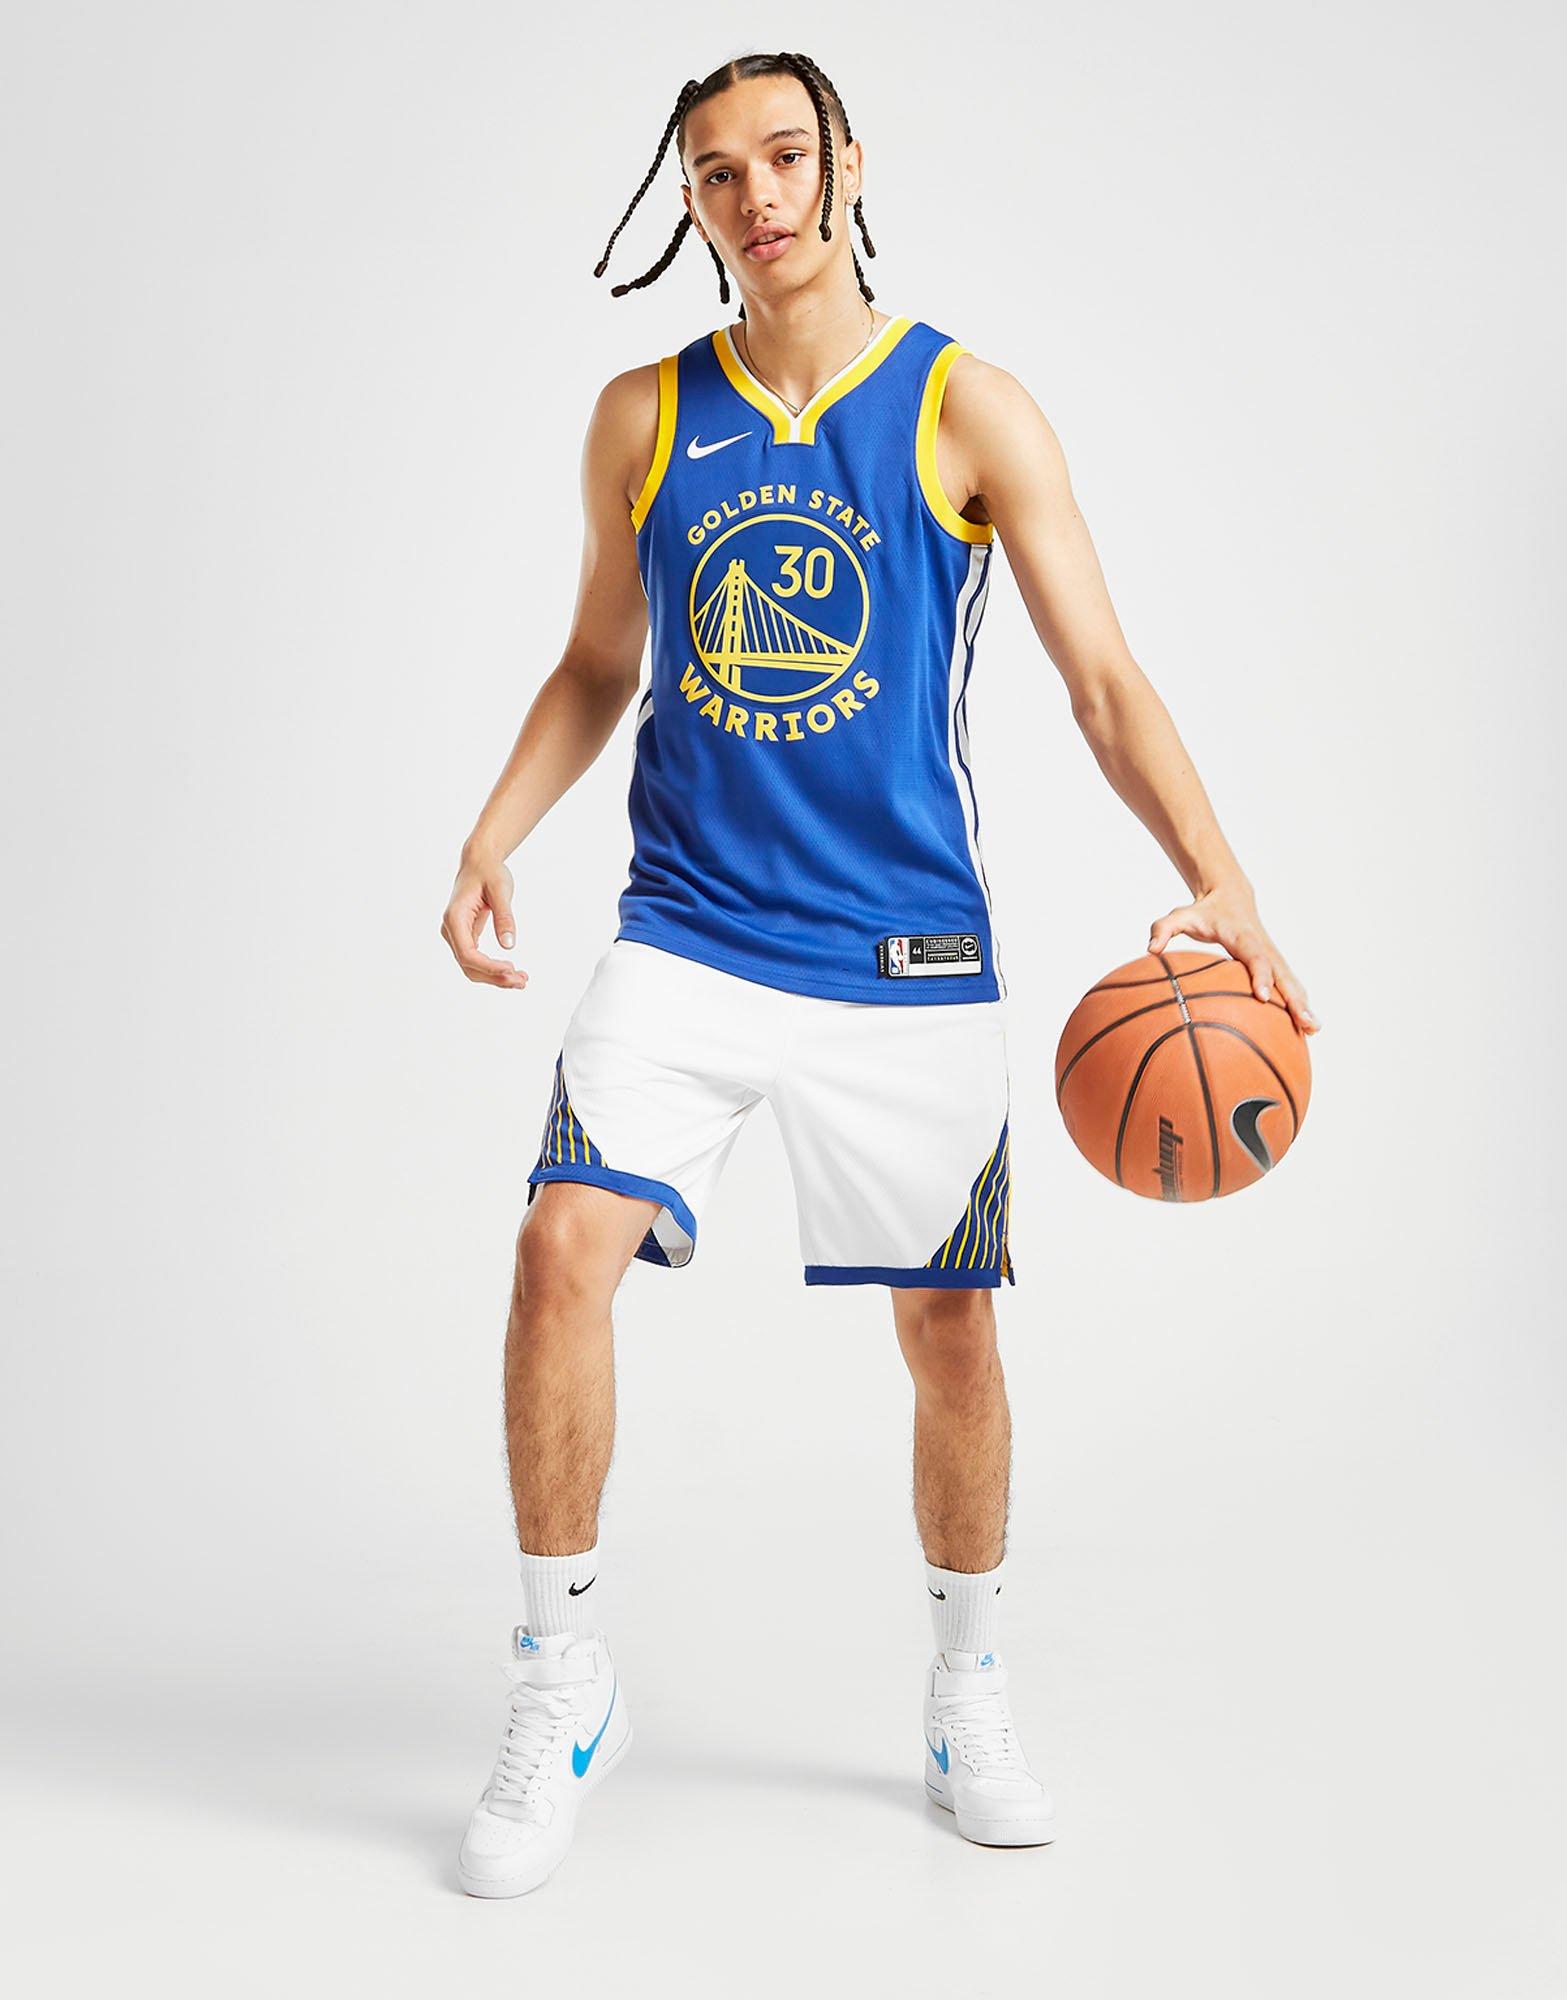 golden state warriors jersey number 30